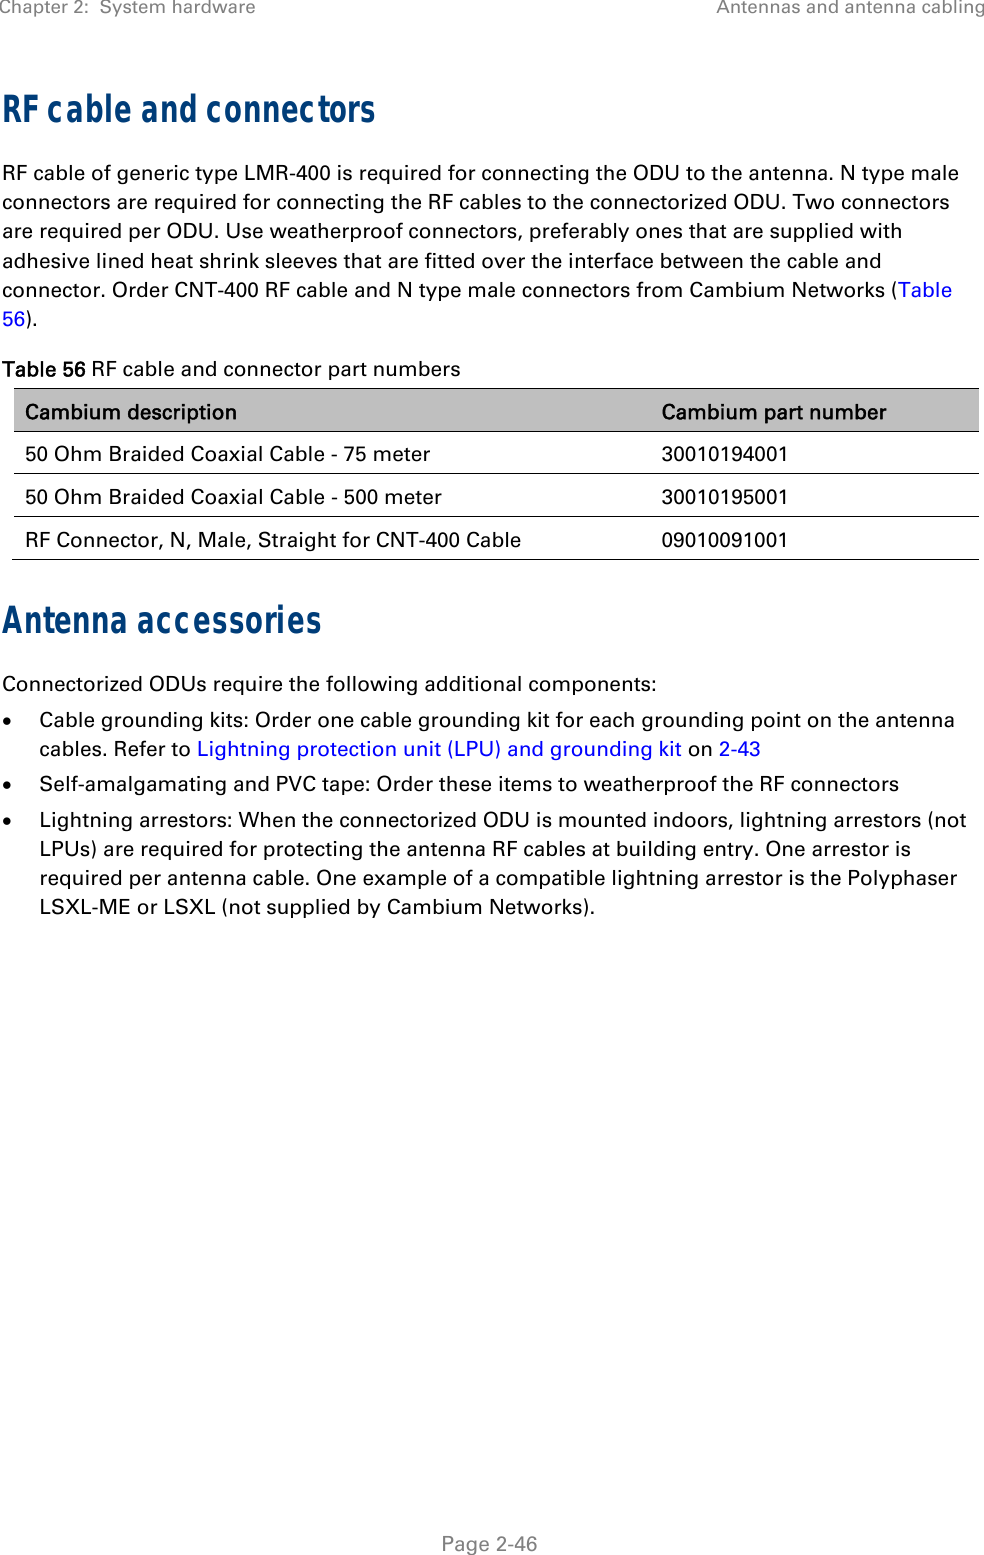 Page 113 of Cambium Networks 89FT0042 PTP450b Transceiver User Manual 